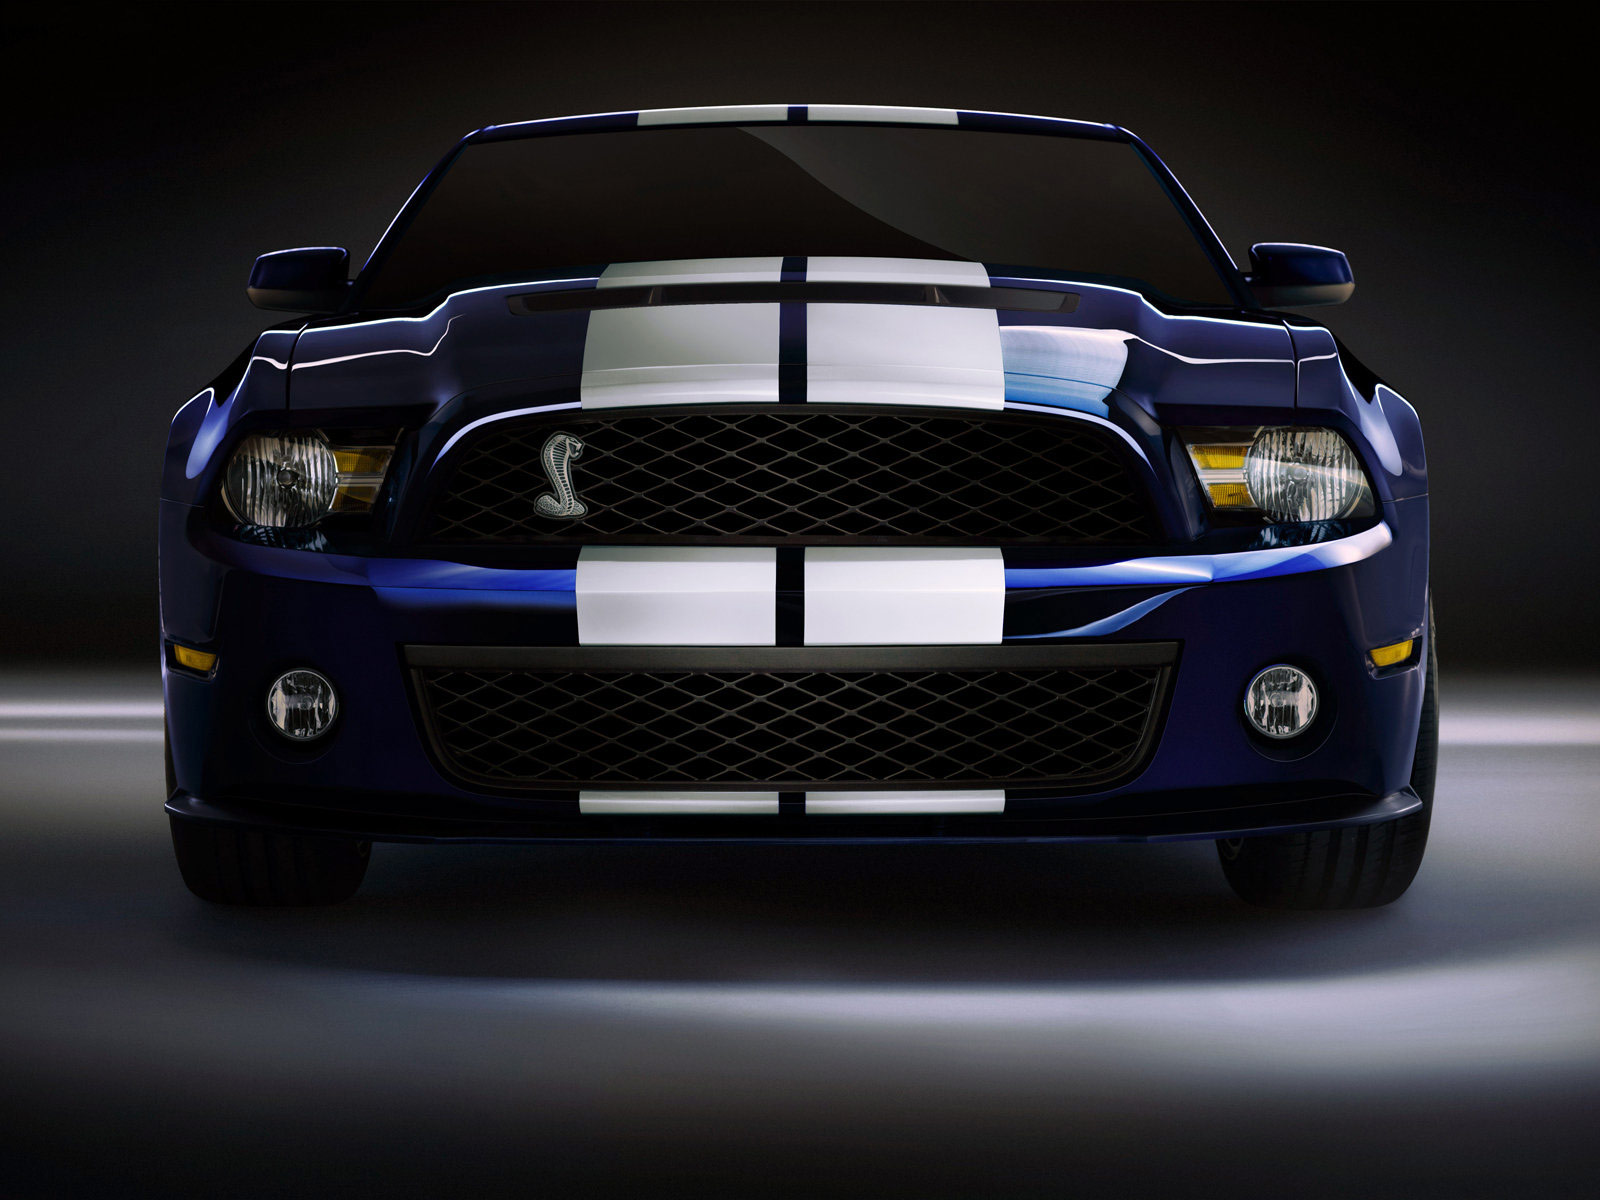 2010 Ford mustang gt500 specs #3